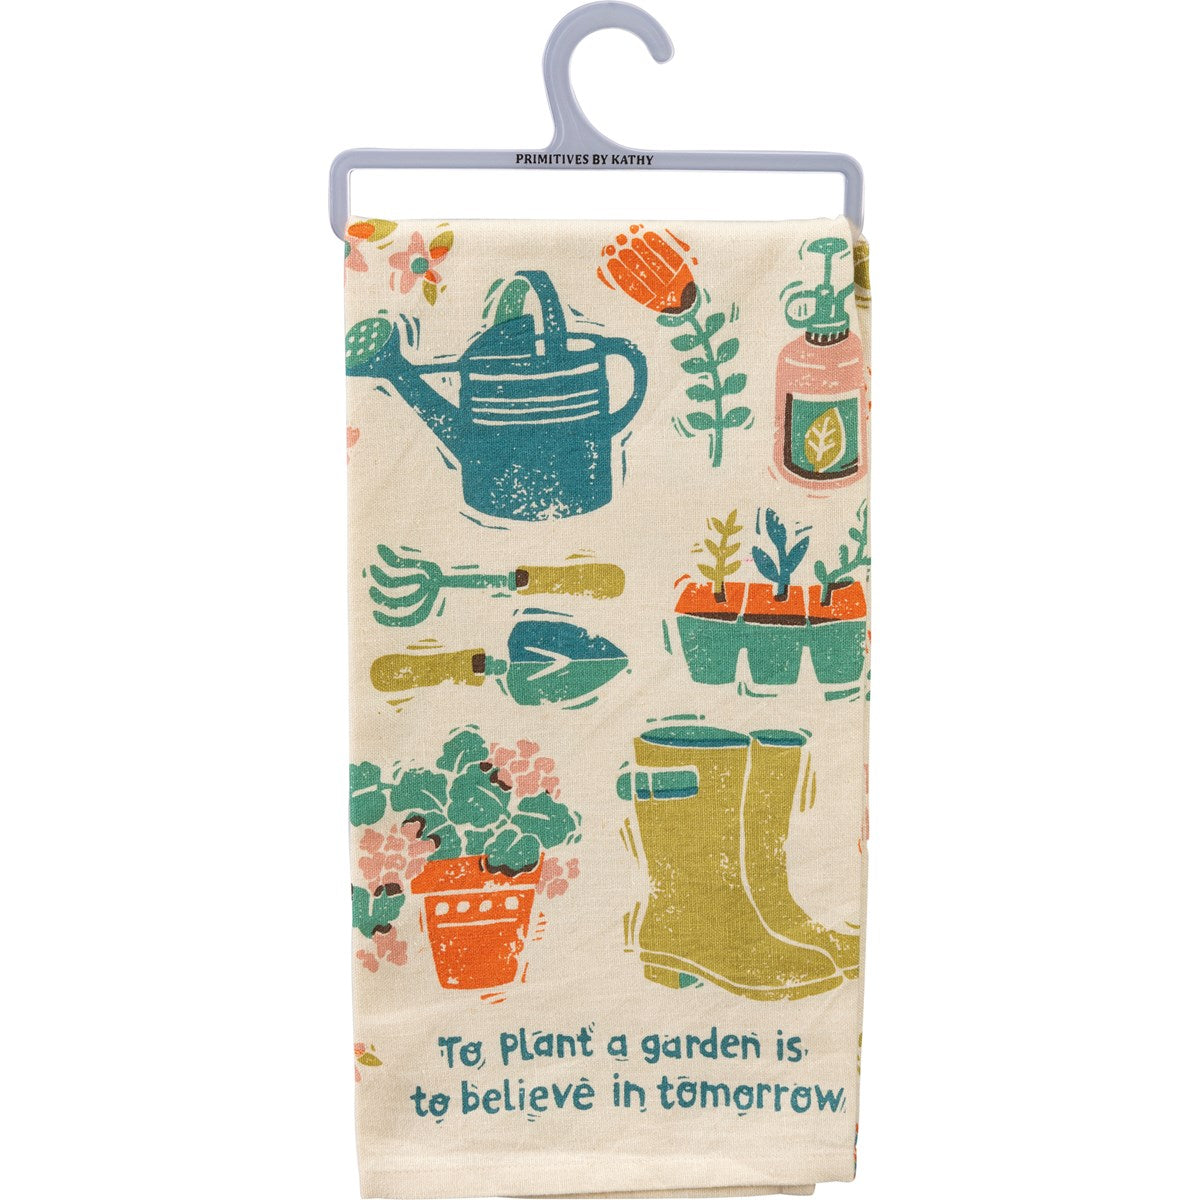 "TO PLANT A GARDEN IS TO BELIEVE IN TOMORROW" DISH TOWEL